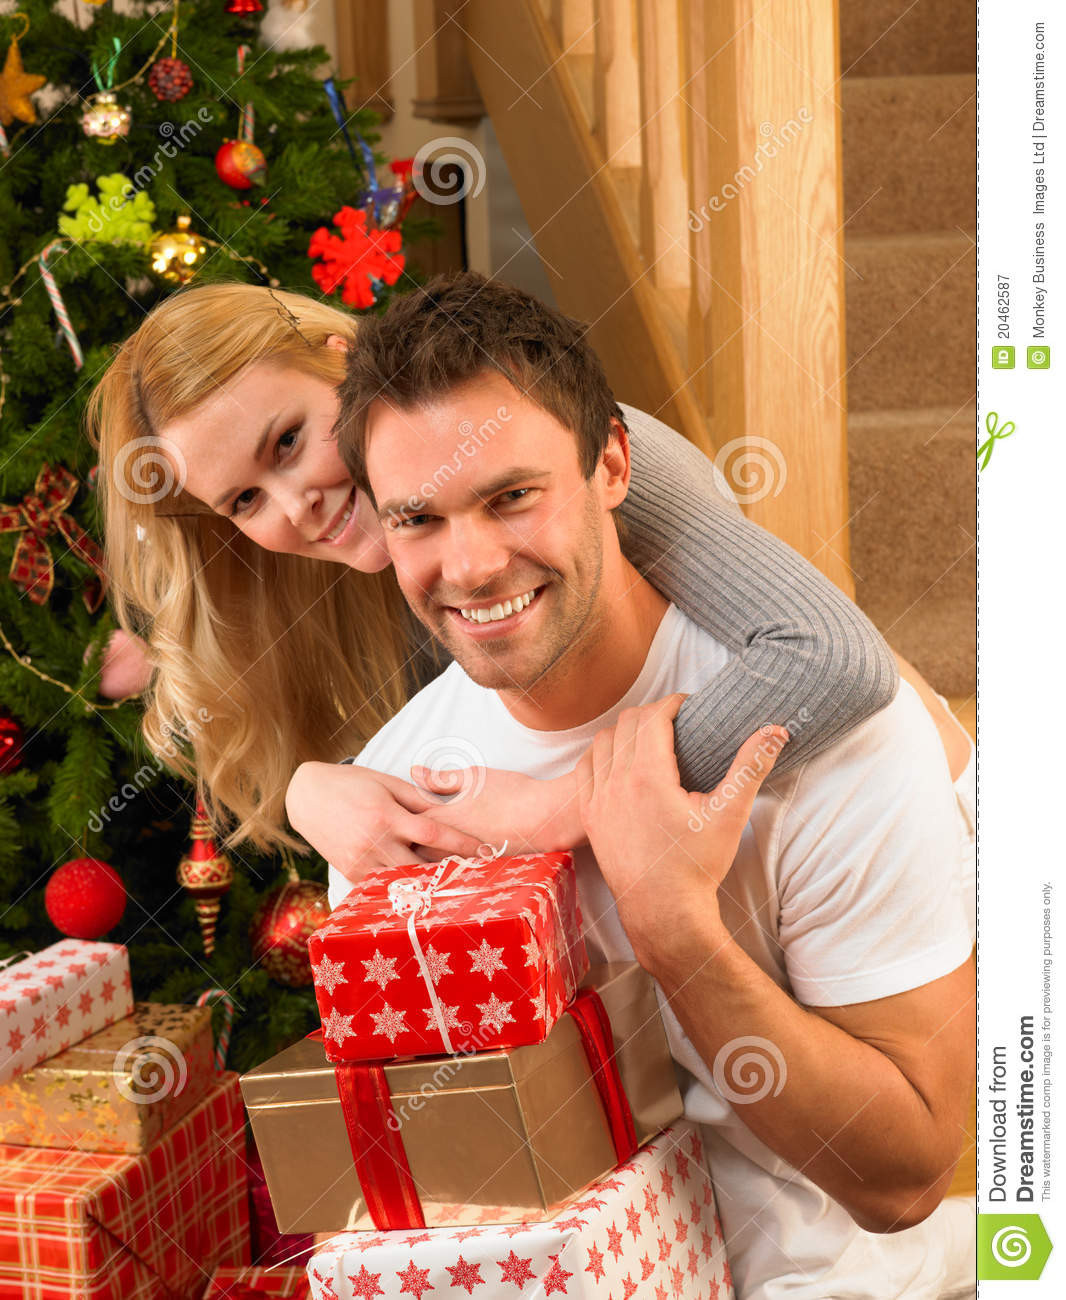 Gift Ideas For Young Couples
 Young Couple At Christmas Exchanging Gifts Royalty Free